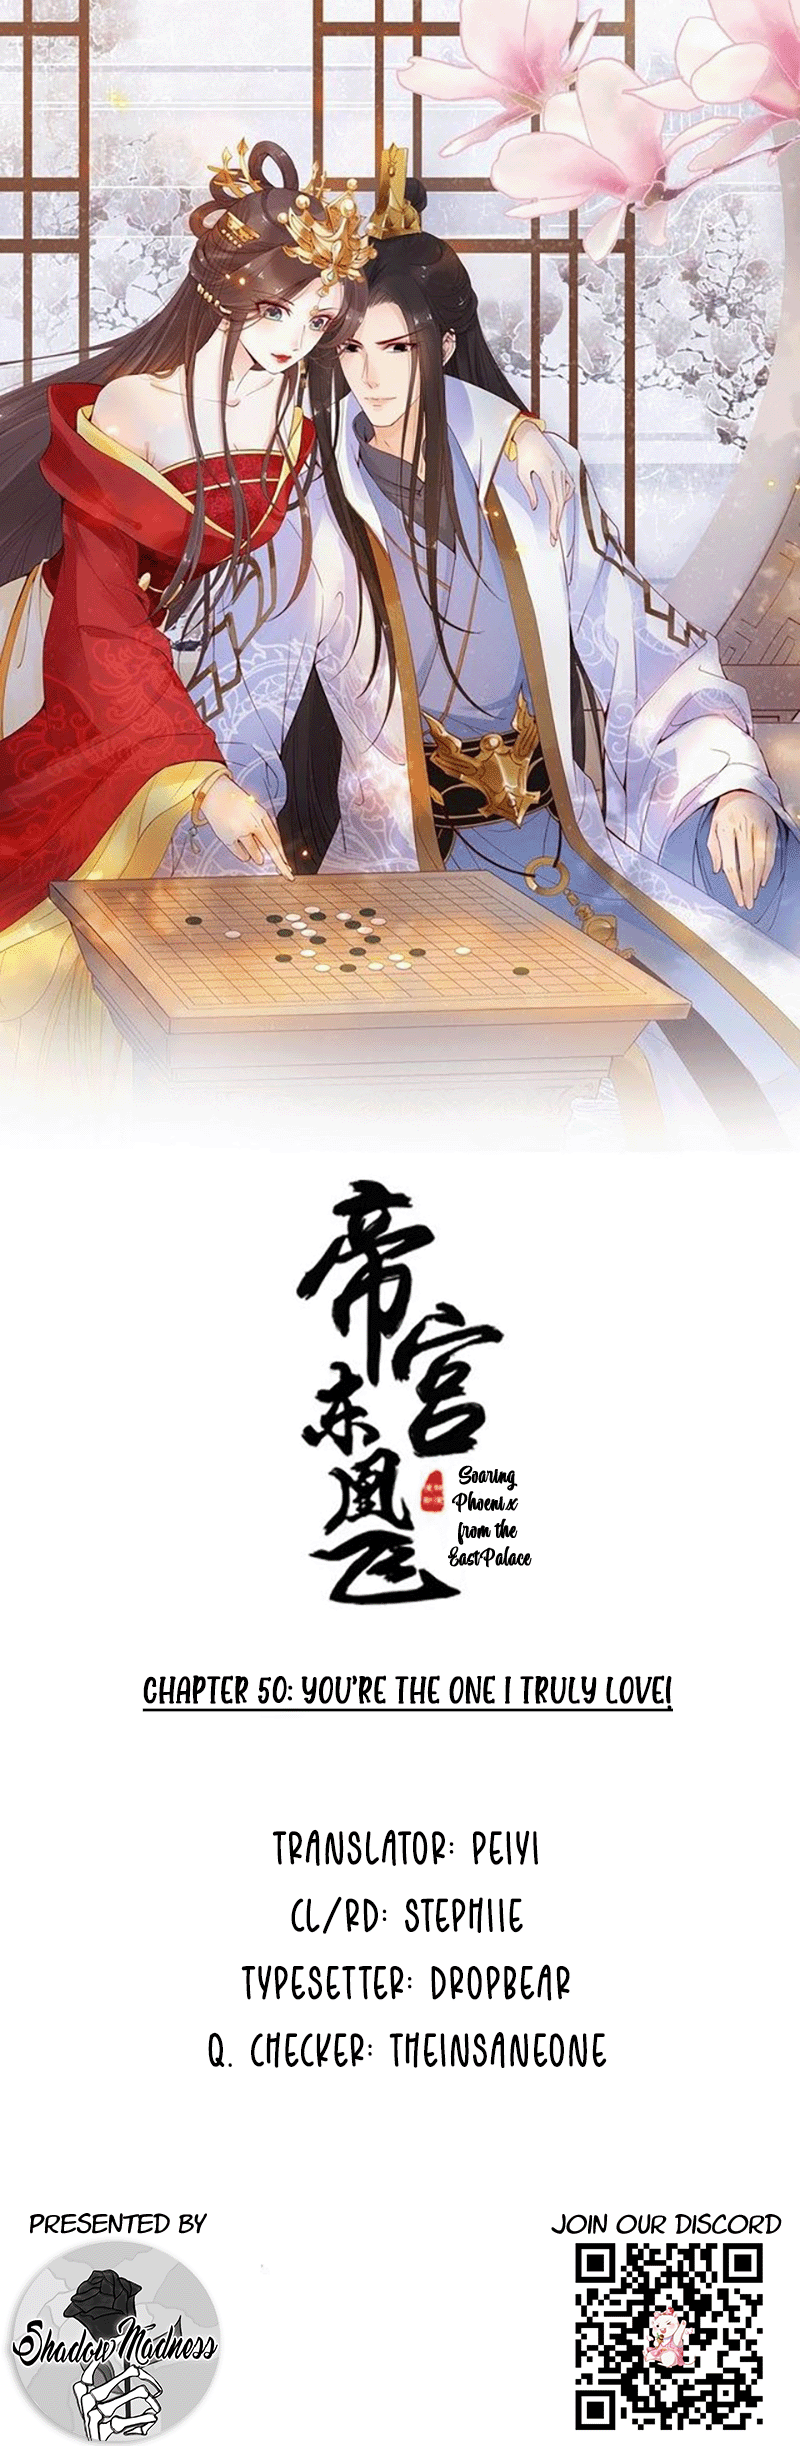 Soaring Phoenix From The East Palace Chapter 50: You're The One I Truly Love! - Picture 1